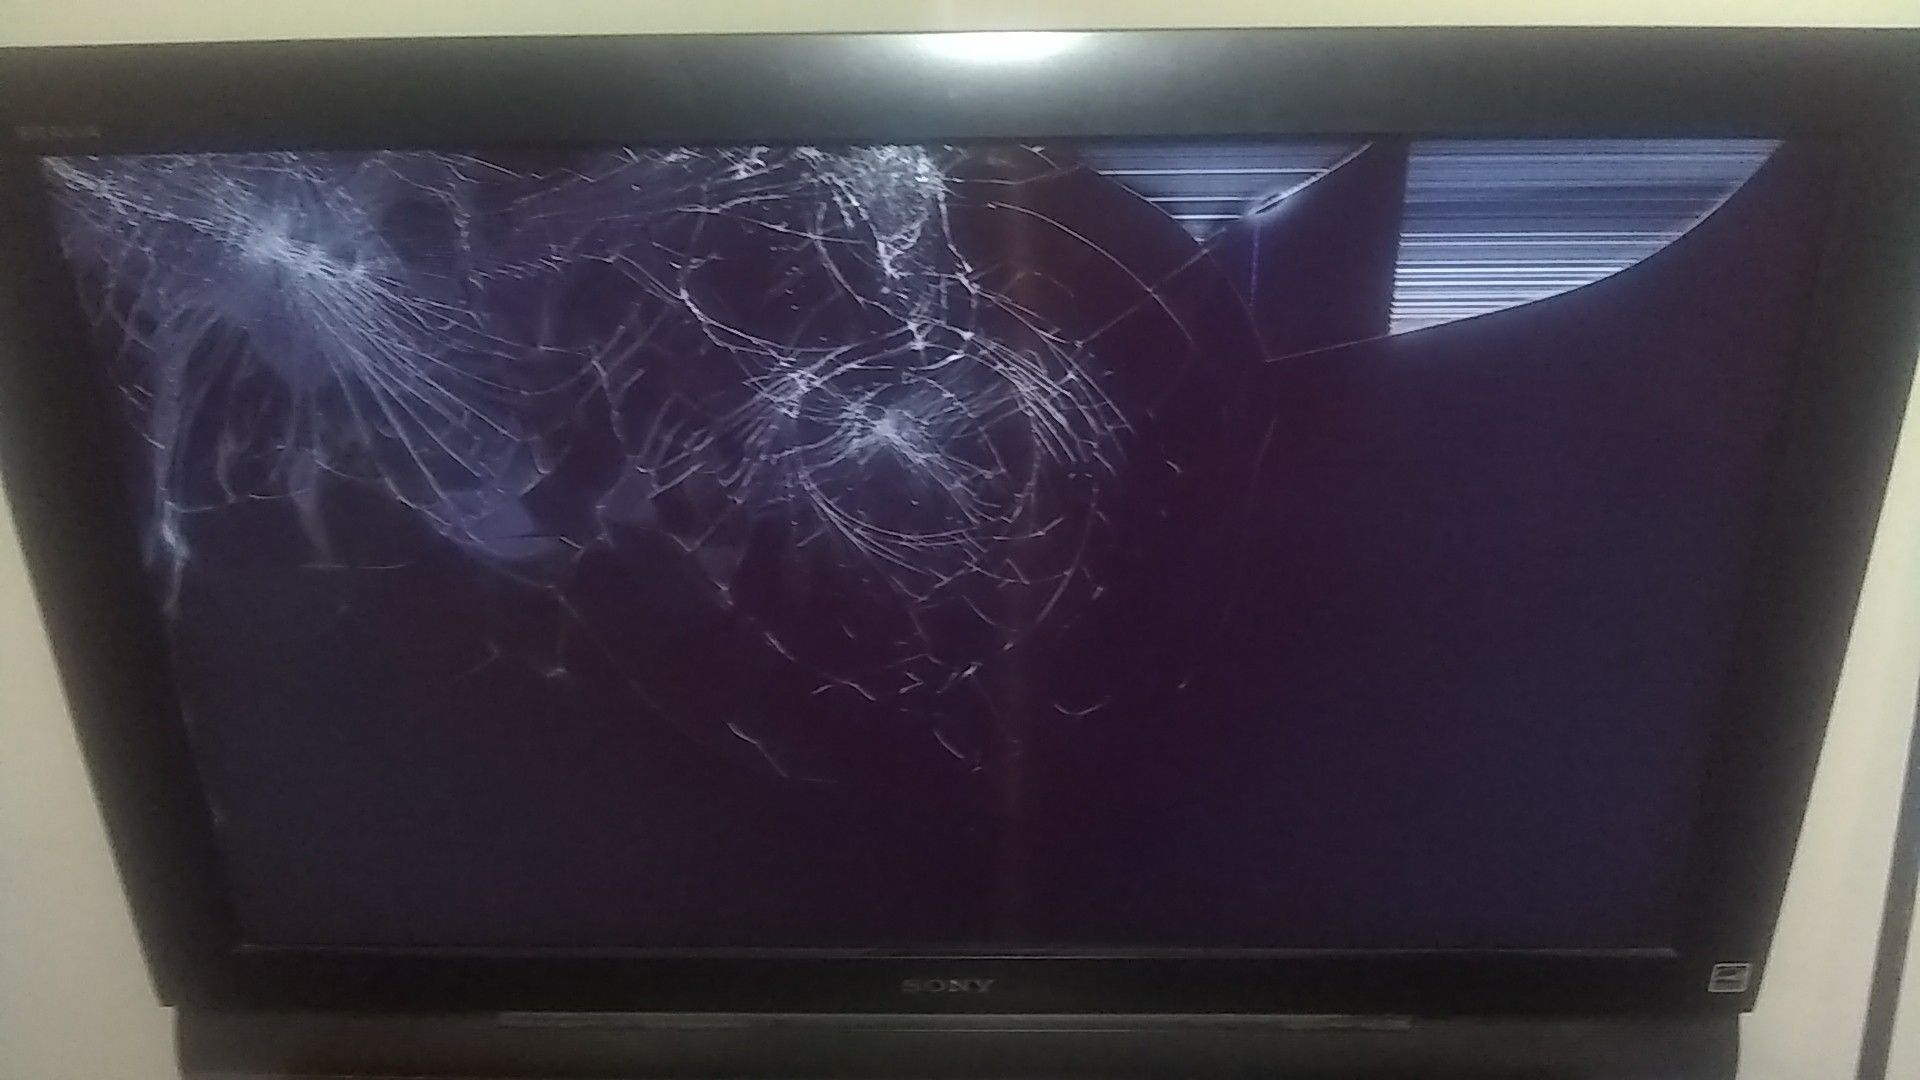 Busted up 37" big screen TV, Sony Bravia.